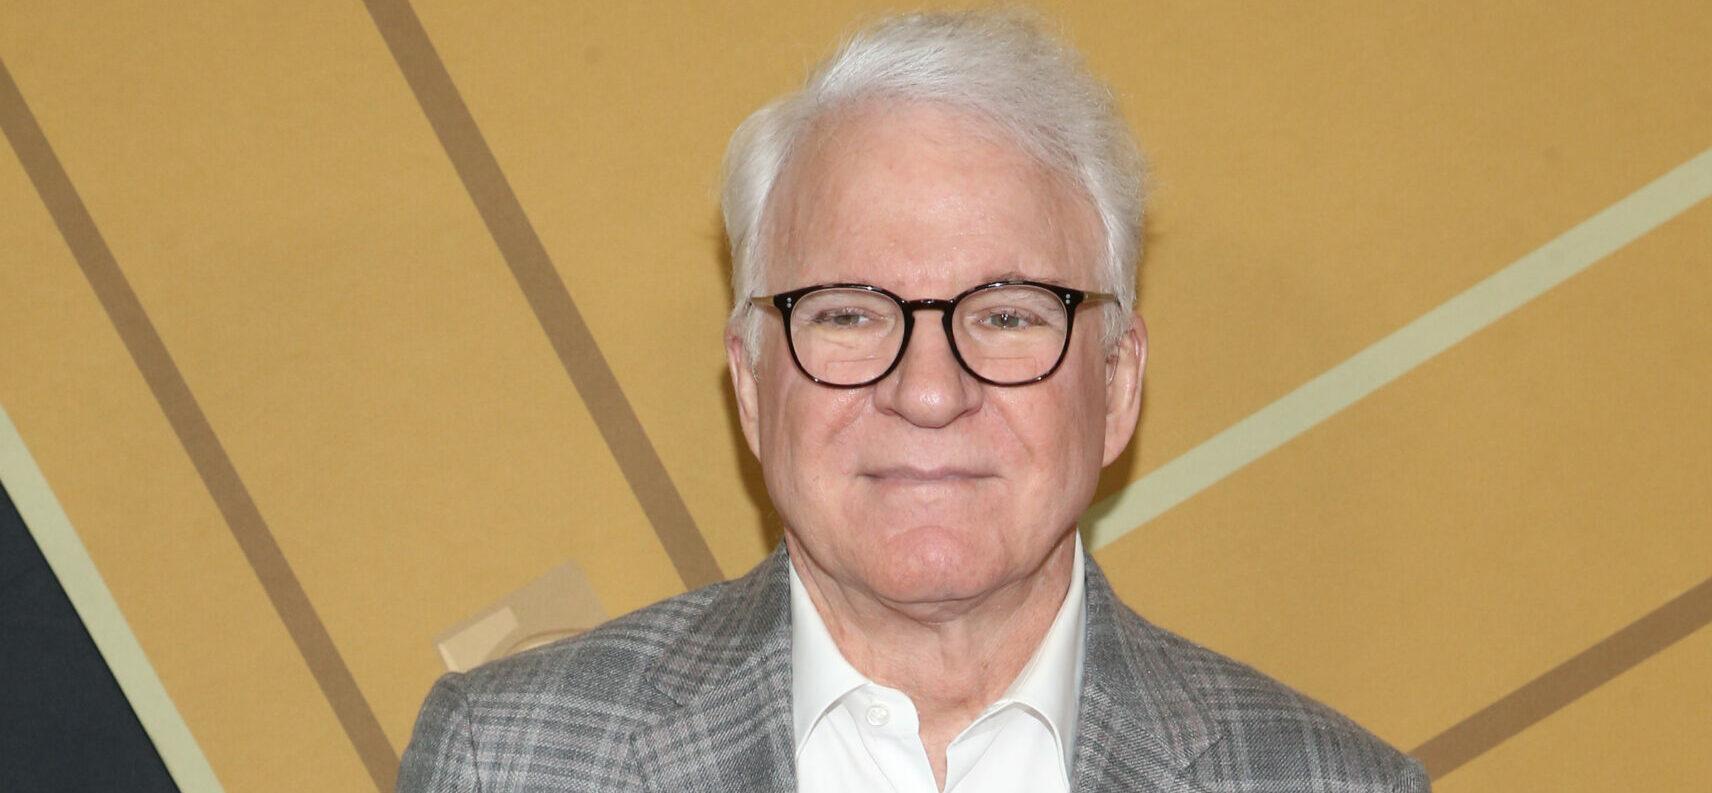 Steve Martin Branded As ‘Horrid’ And An ‘Unkind Perfectionist’ By THIS Actress